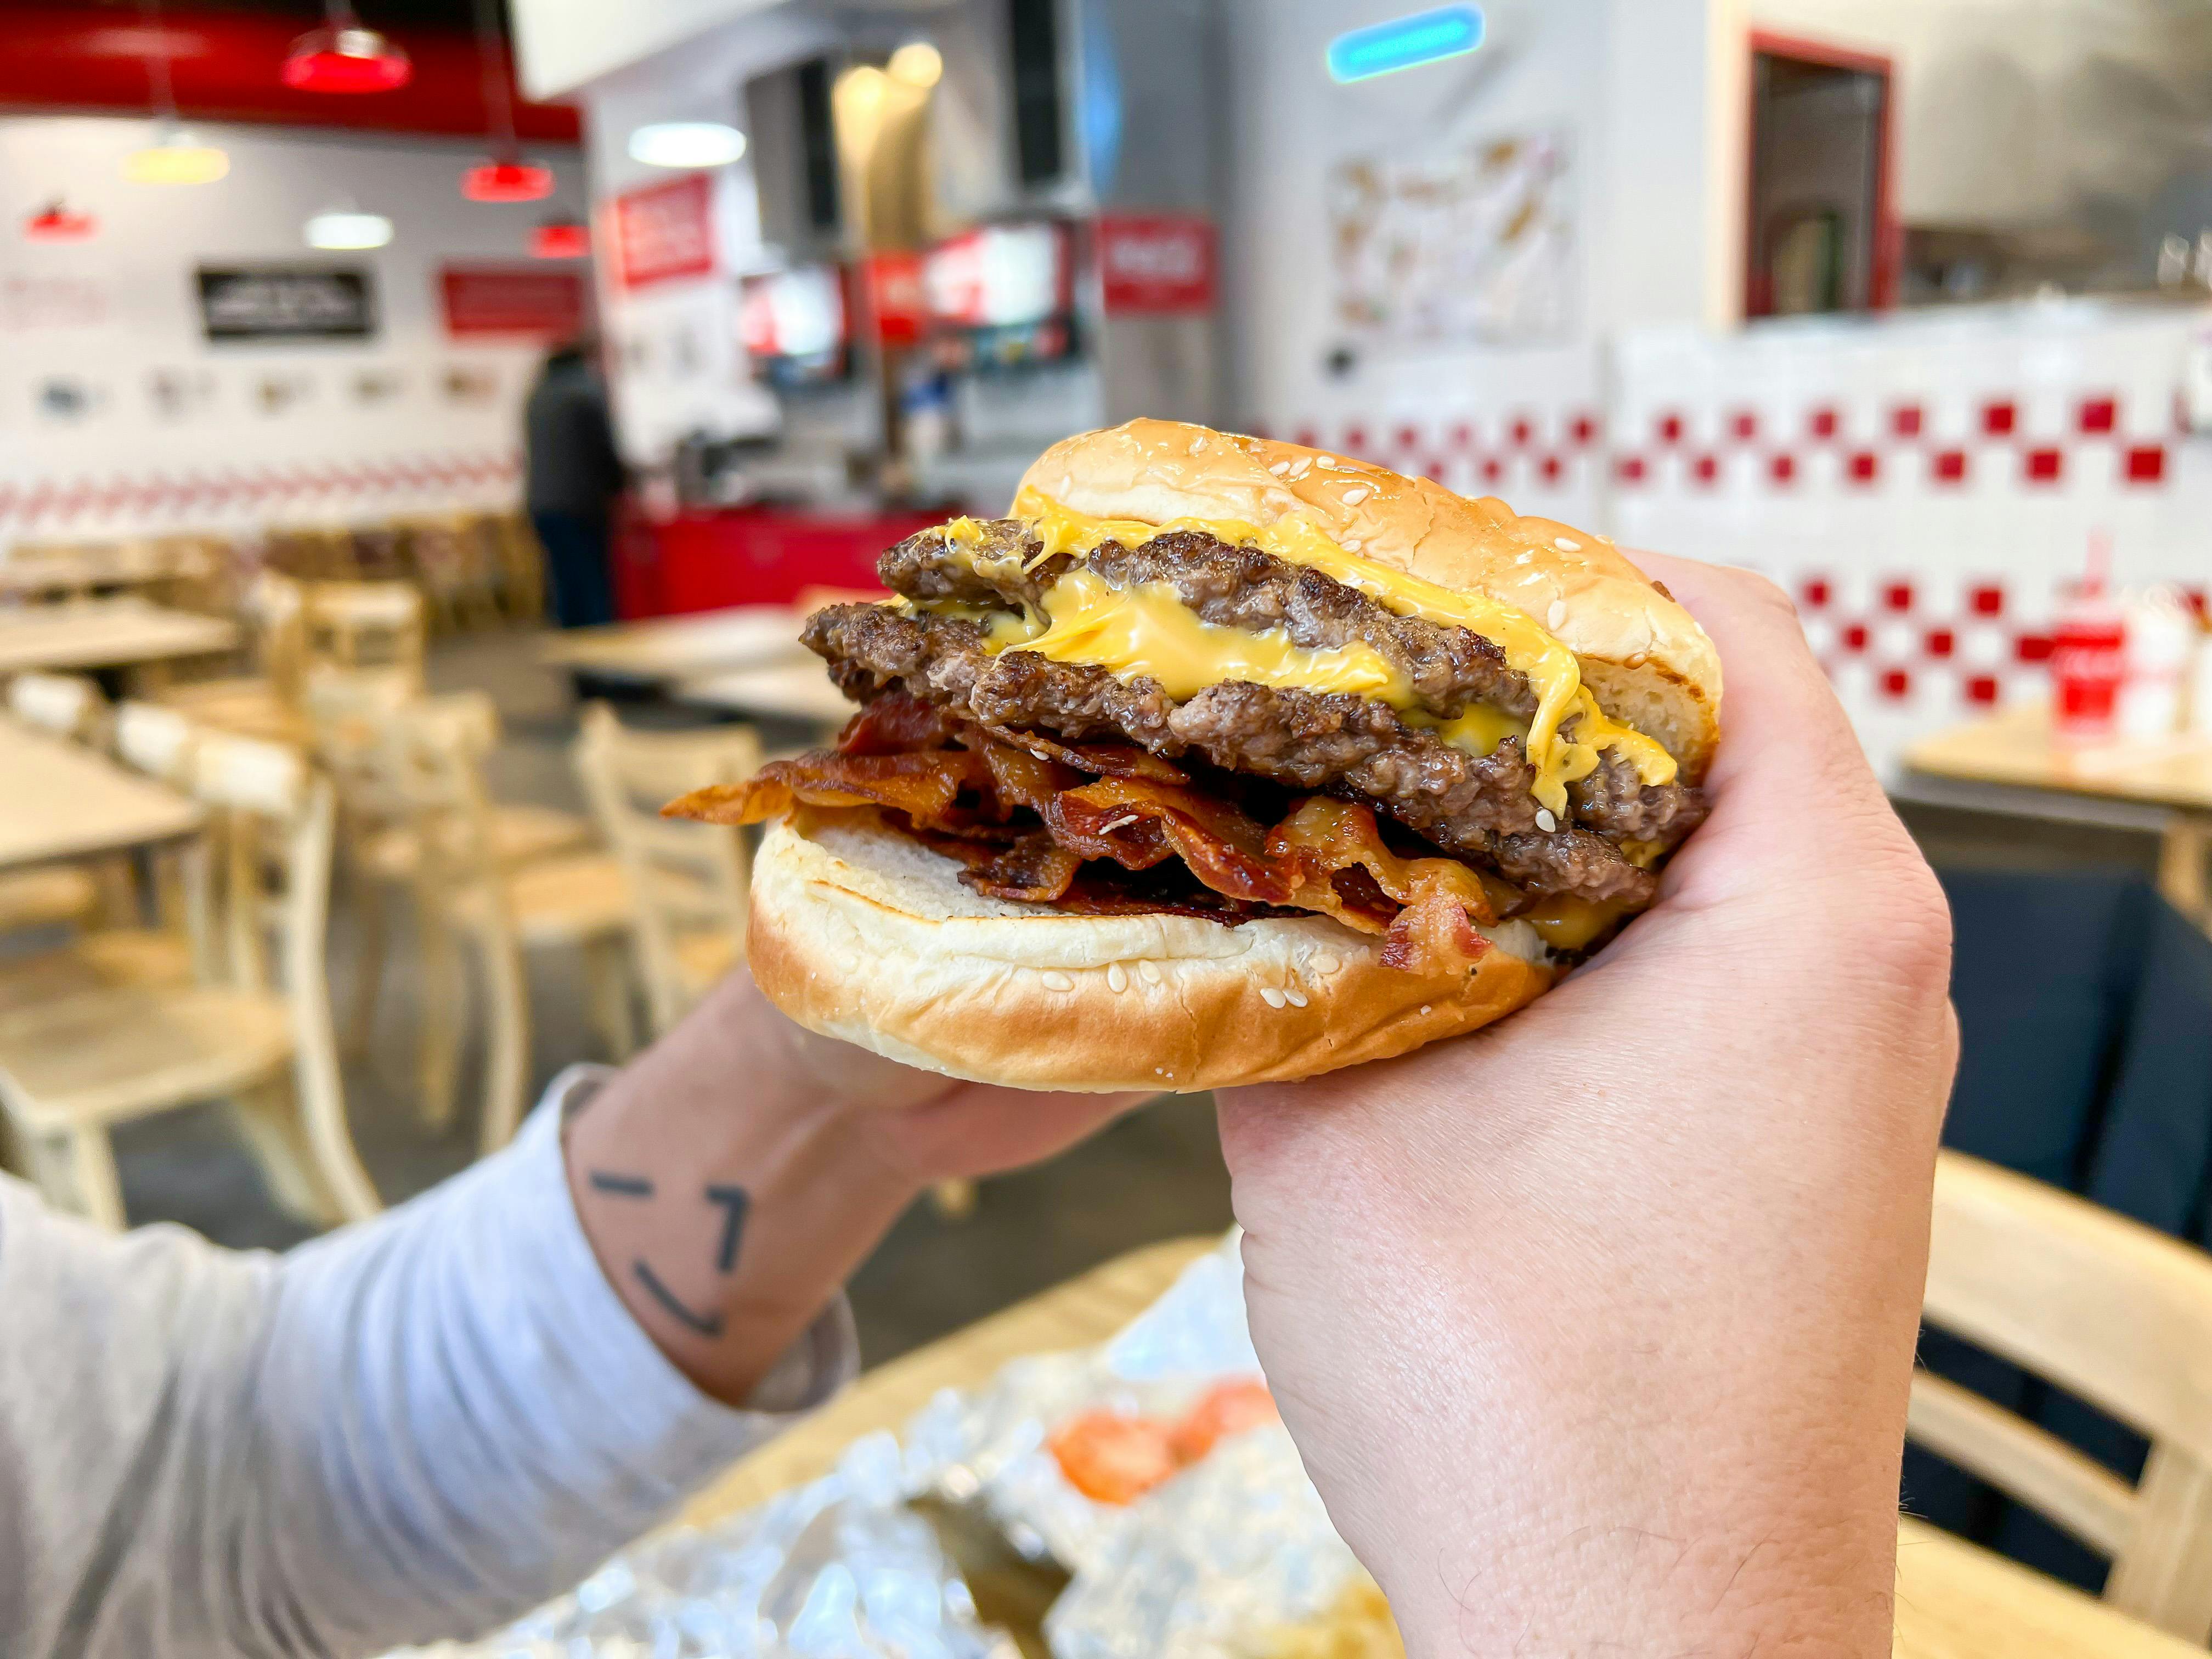 11 Easy Five Guys Burgers Hacks & Deals - The Krazy Coupon Lady